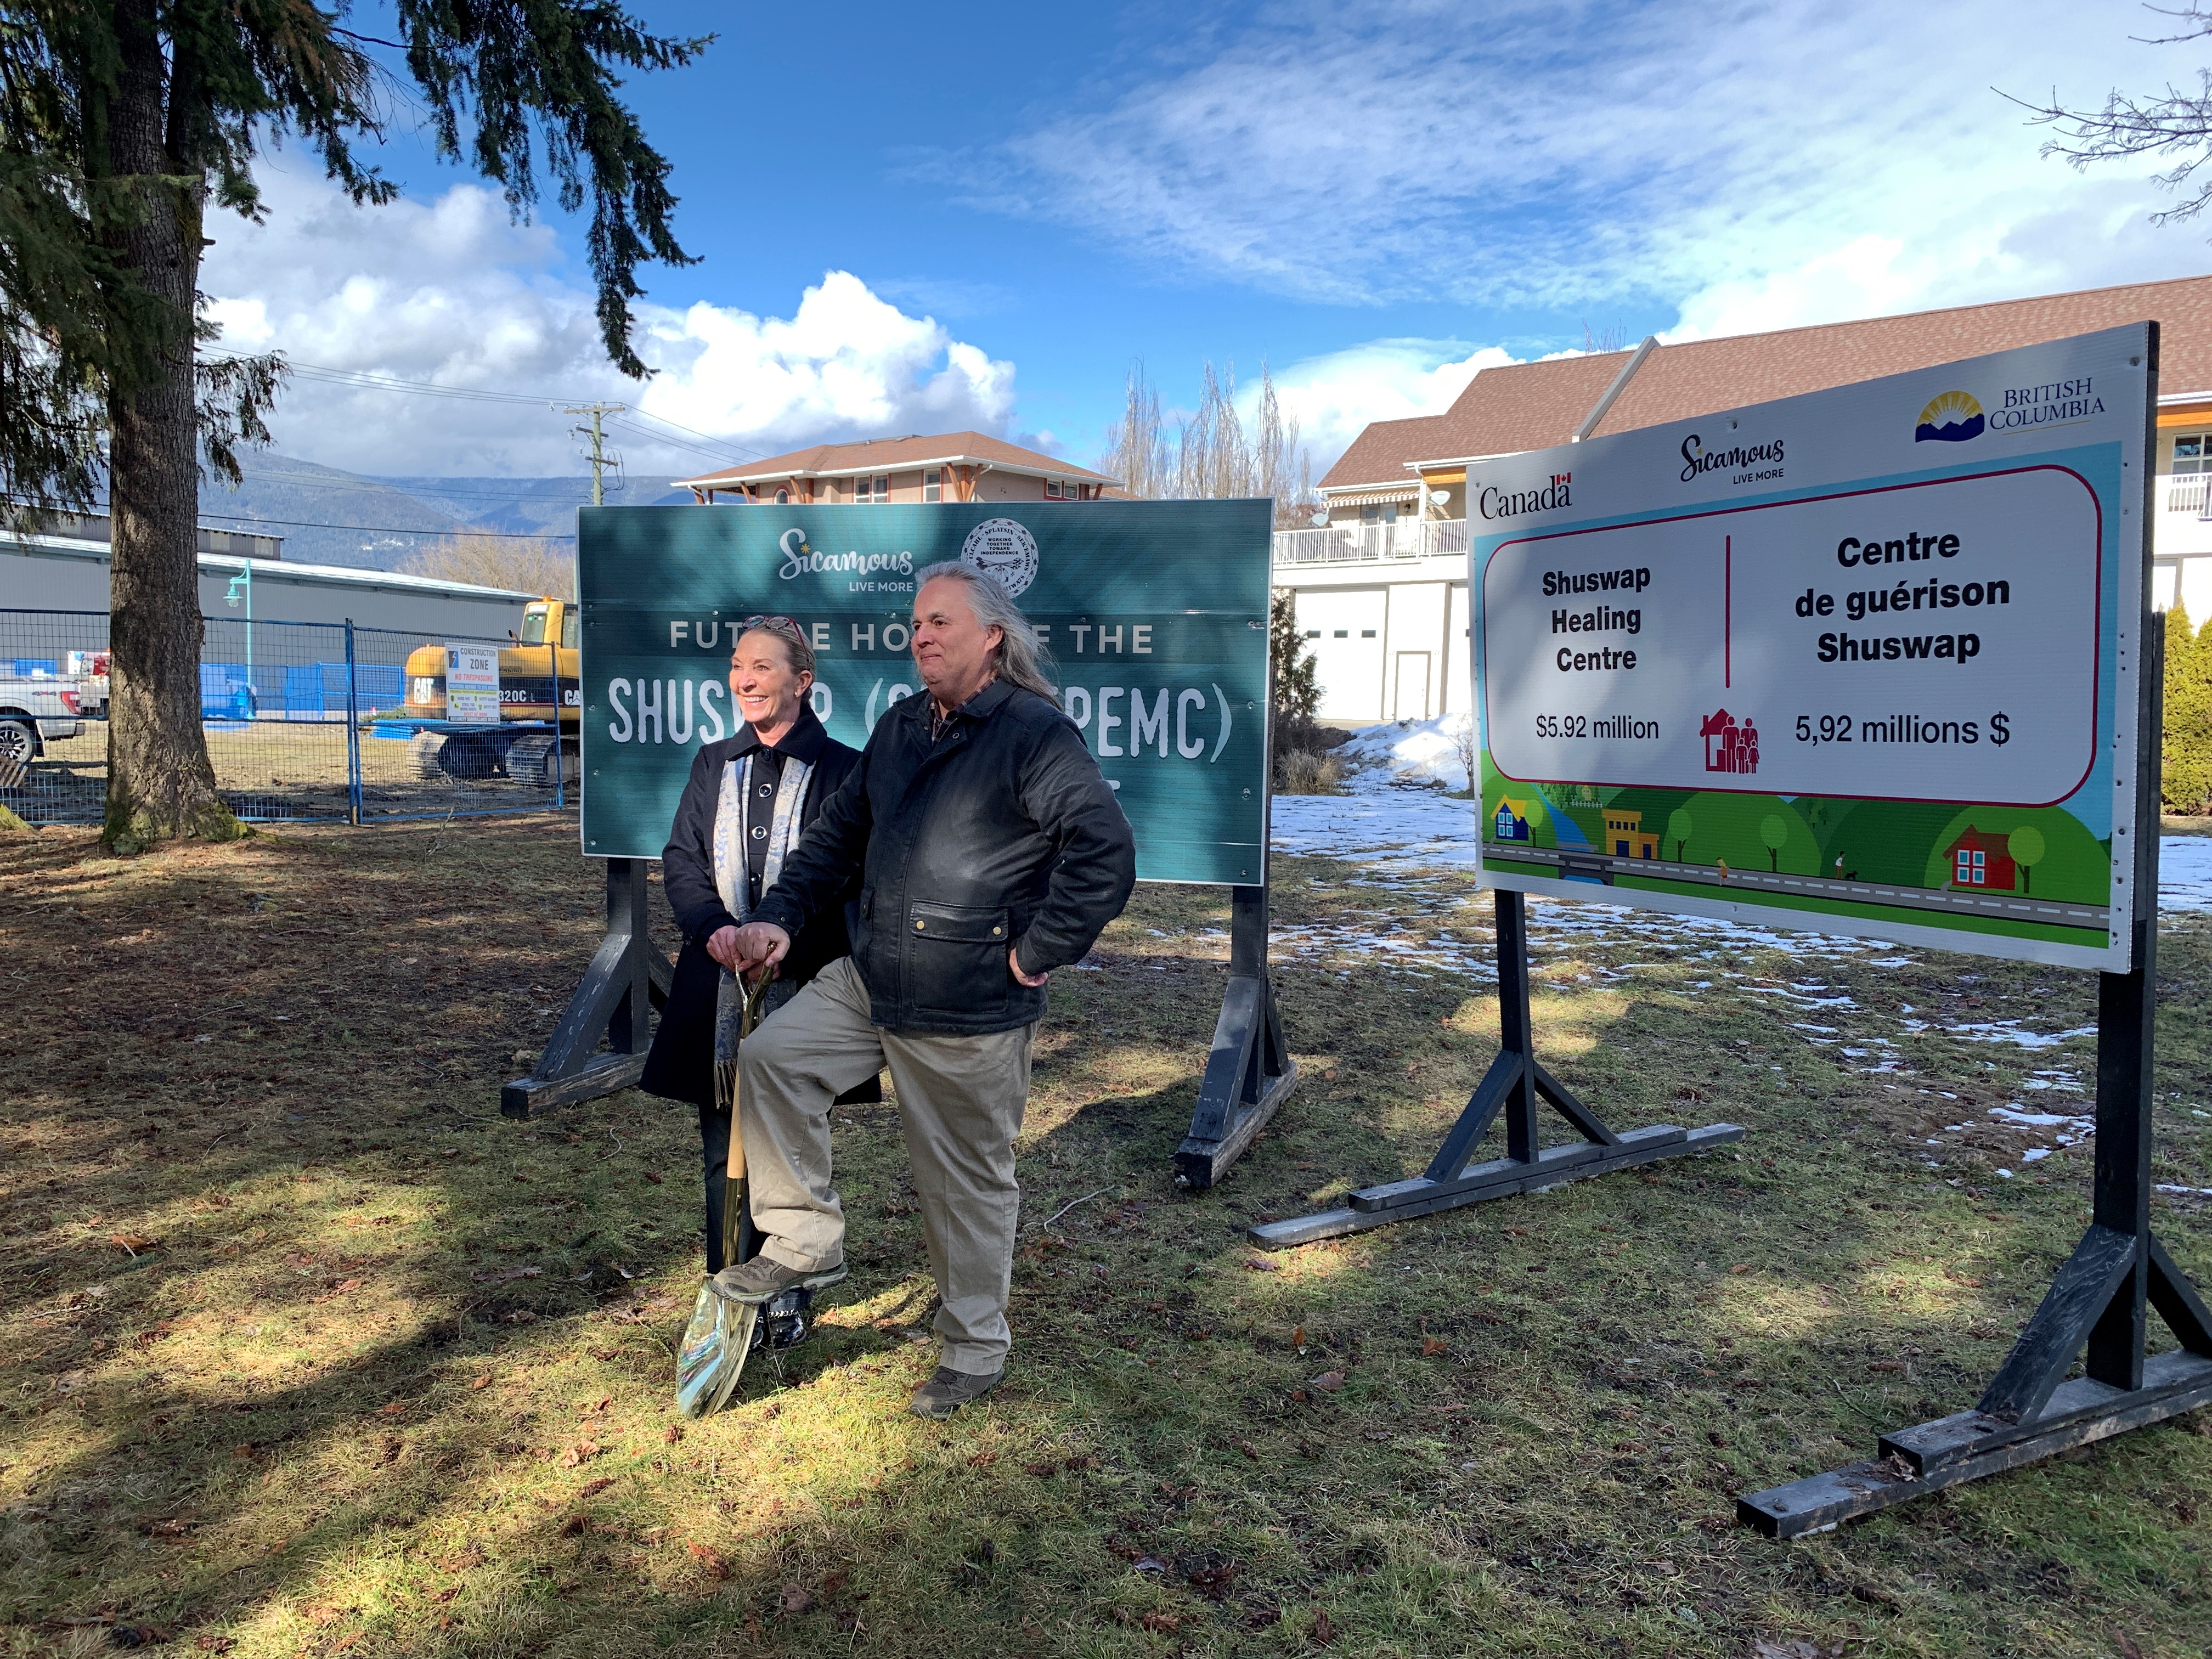 Modern and traditional health practices come together at new Shuswap healing centre